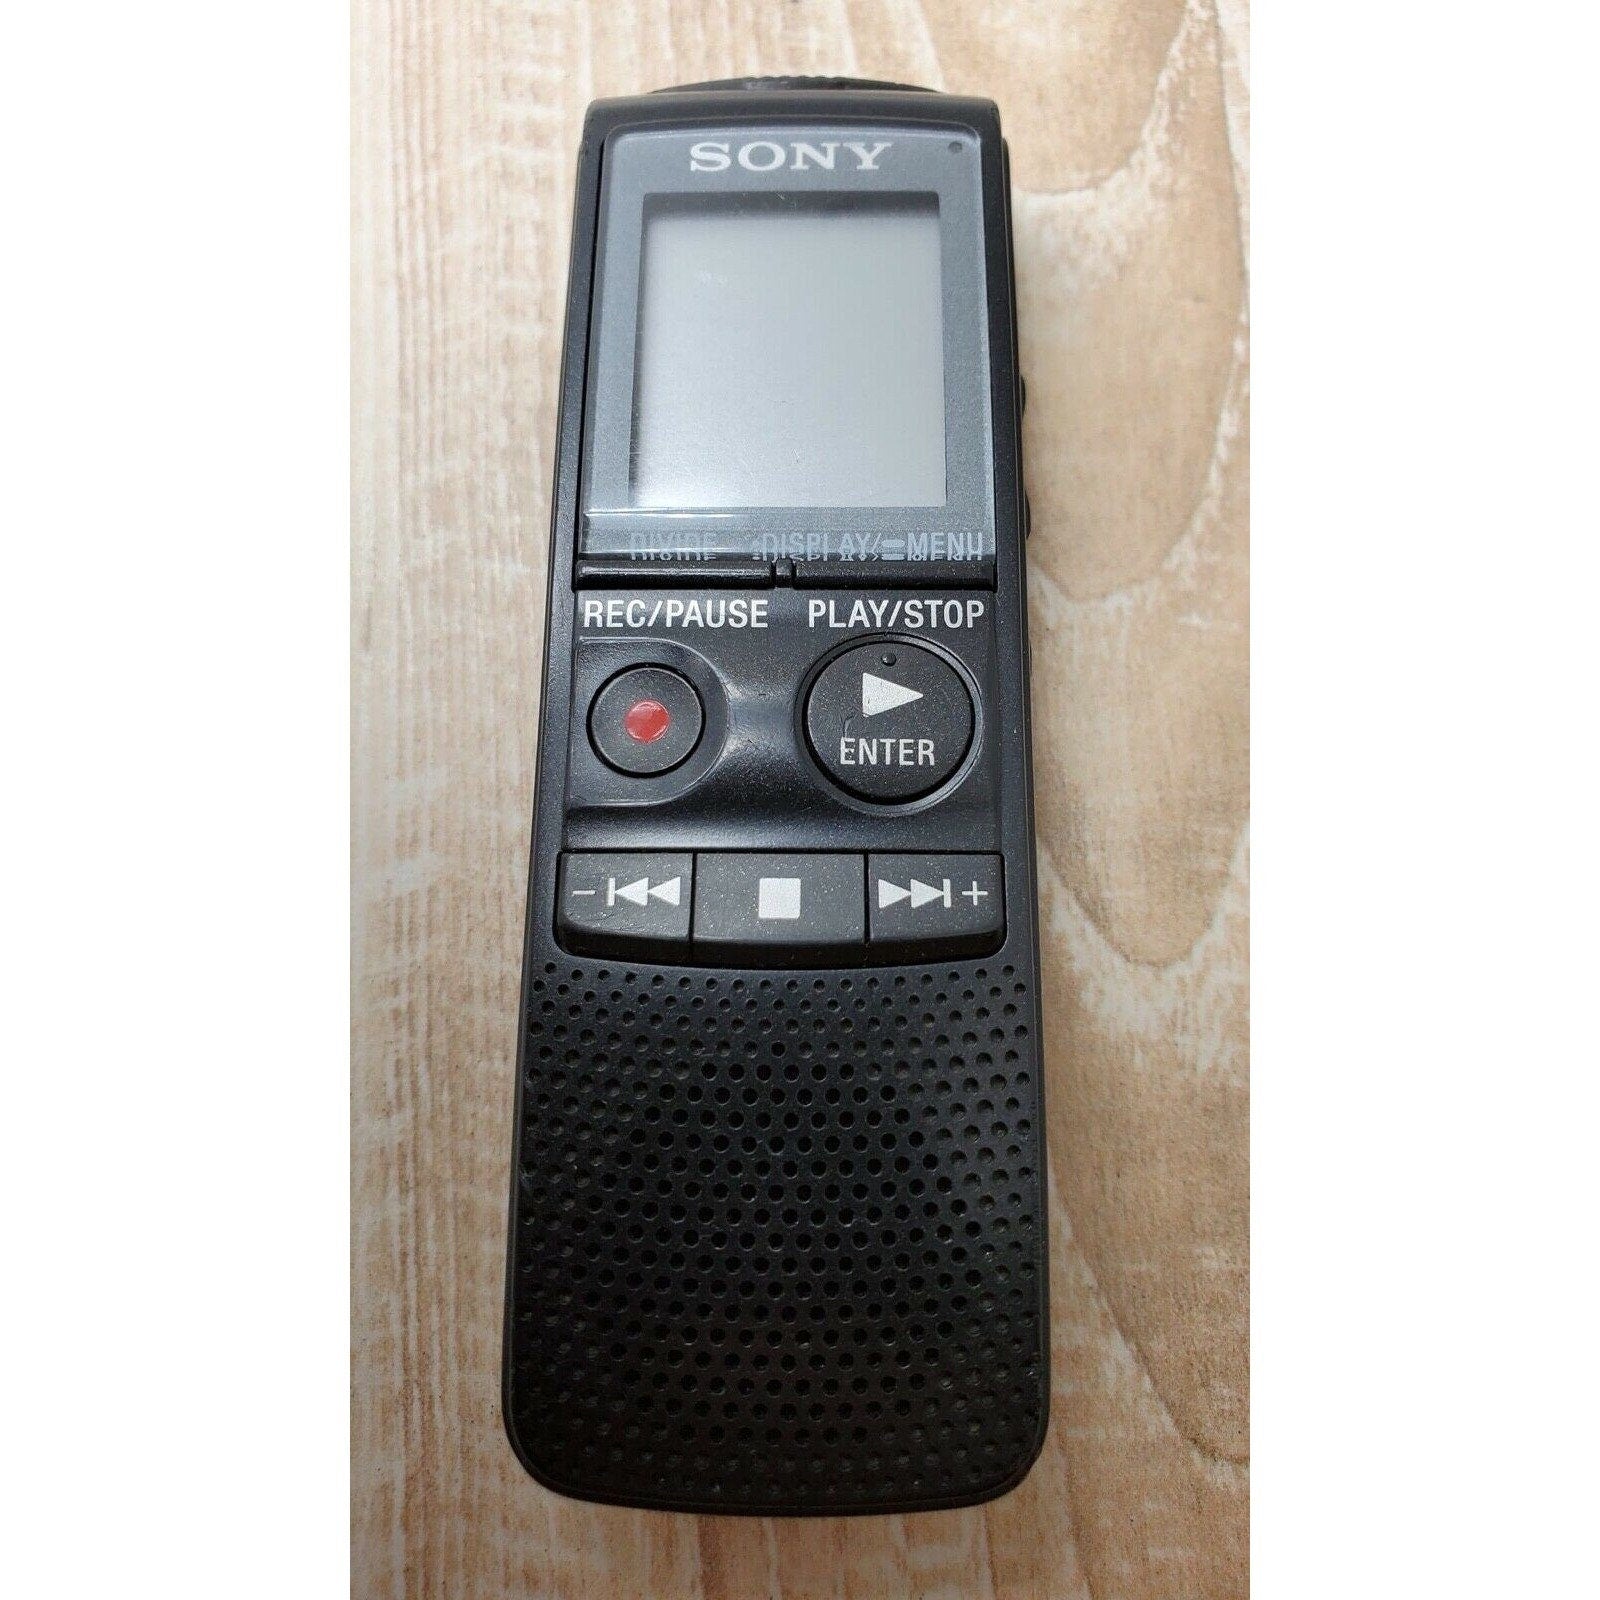 Sony ICD-PX720 Digital Voice Recorder